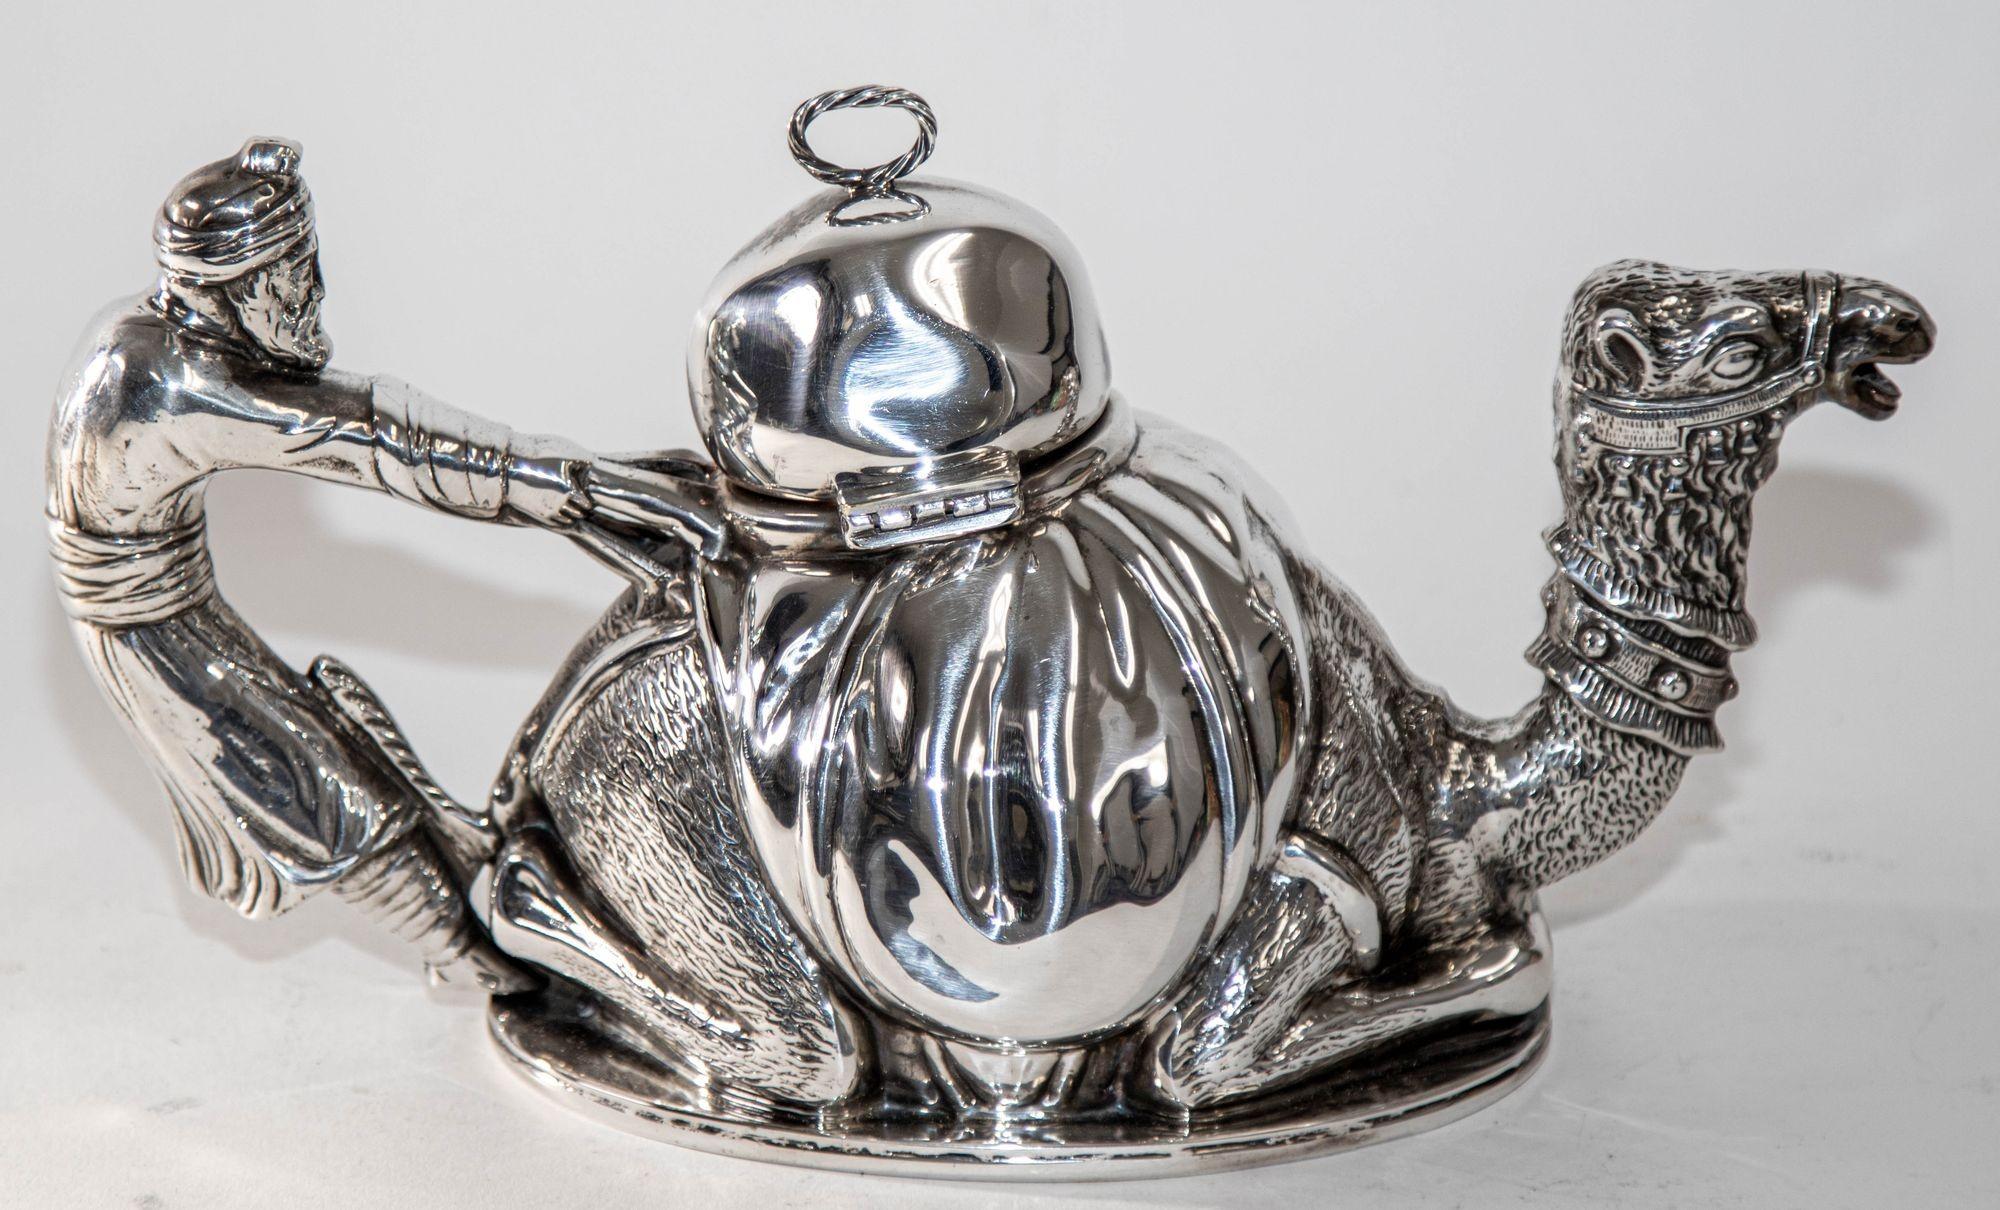 French silver-plated Karawan teapot in a camel form design: A Marvel by Mariage Frères, Paris.(French, founded 1854).it emerges from the storied ateliers of Mariage Frères, a renowned luxury Parisian tea company. Behd a captivating creation, a